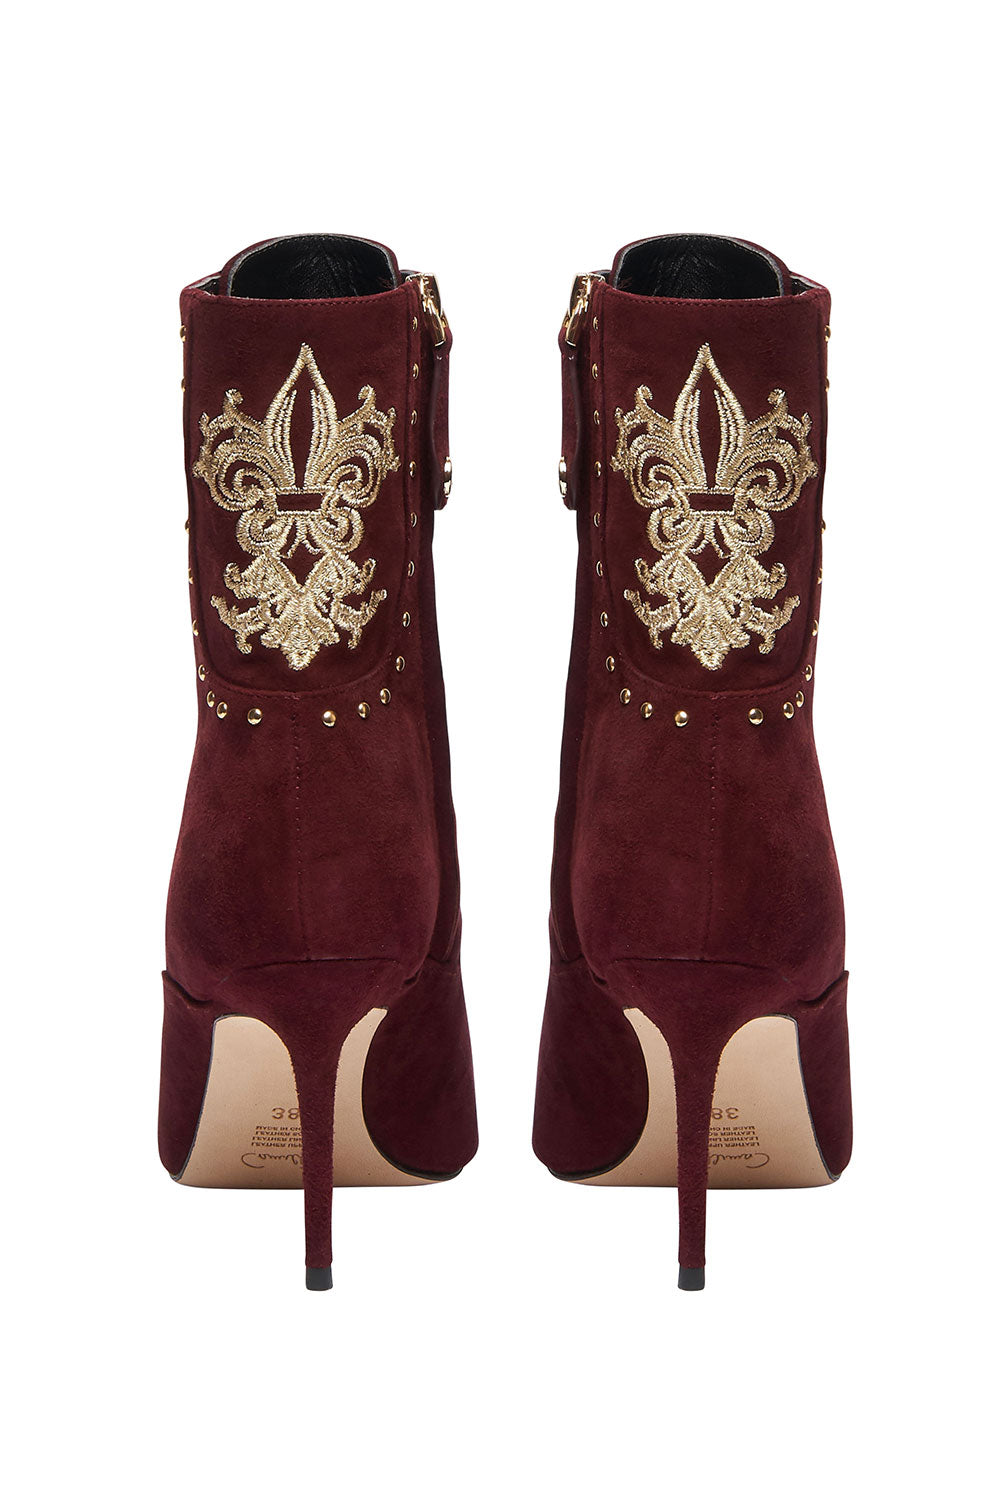 LACED BOOT BURGUNDY